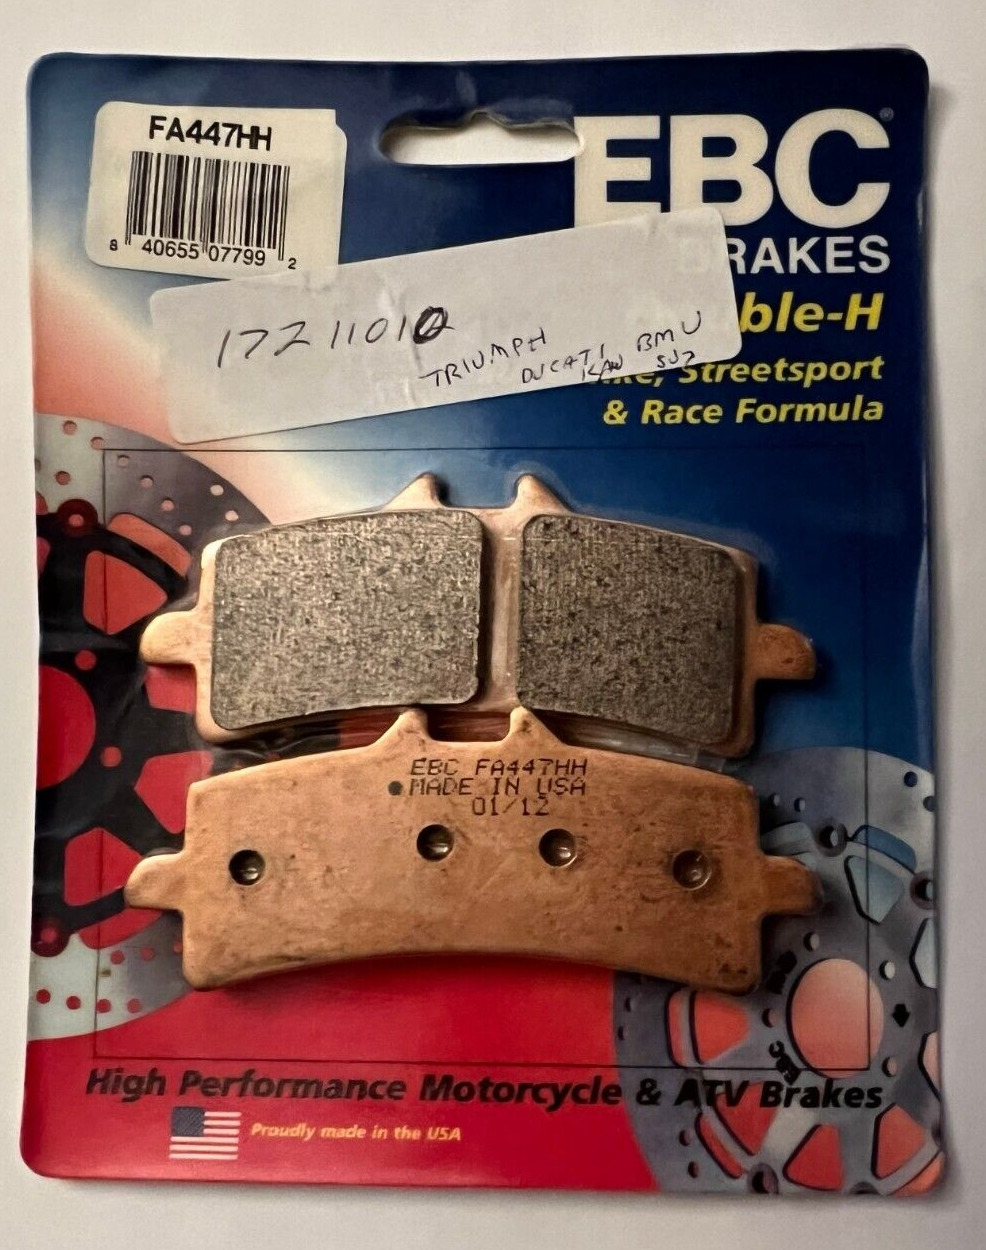 EBC Double-H Sintered Brake Pads (FA447HH) - Made in the USA